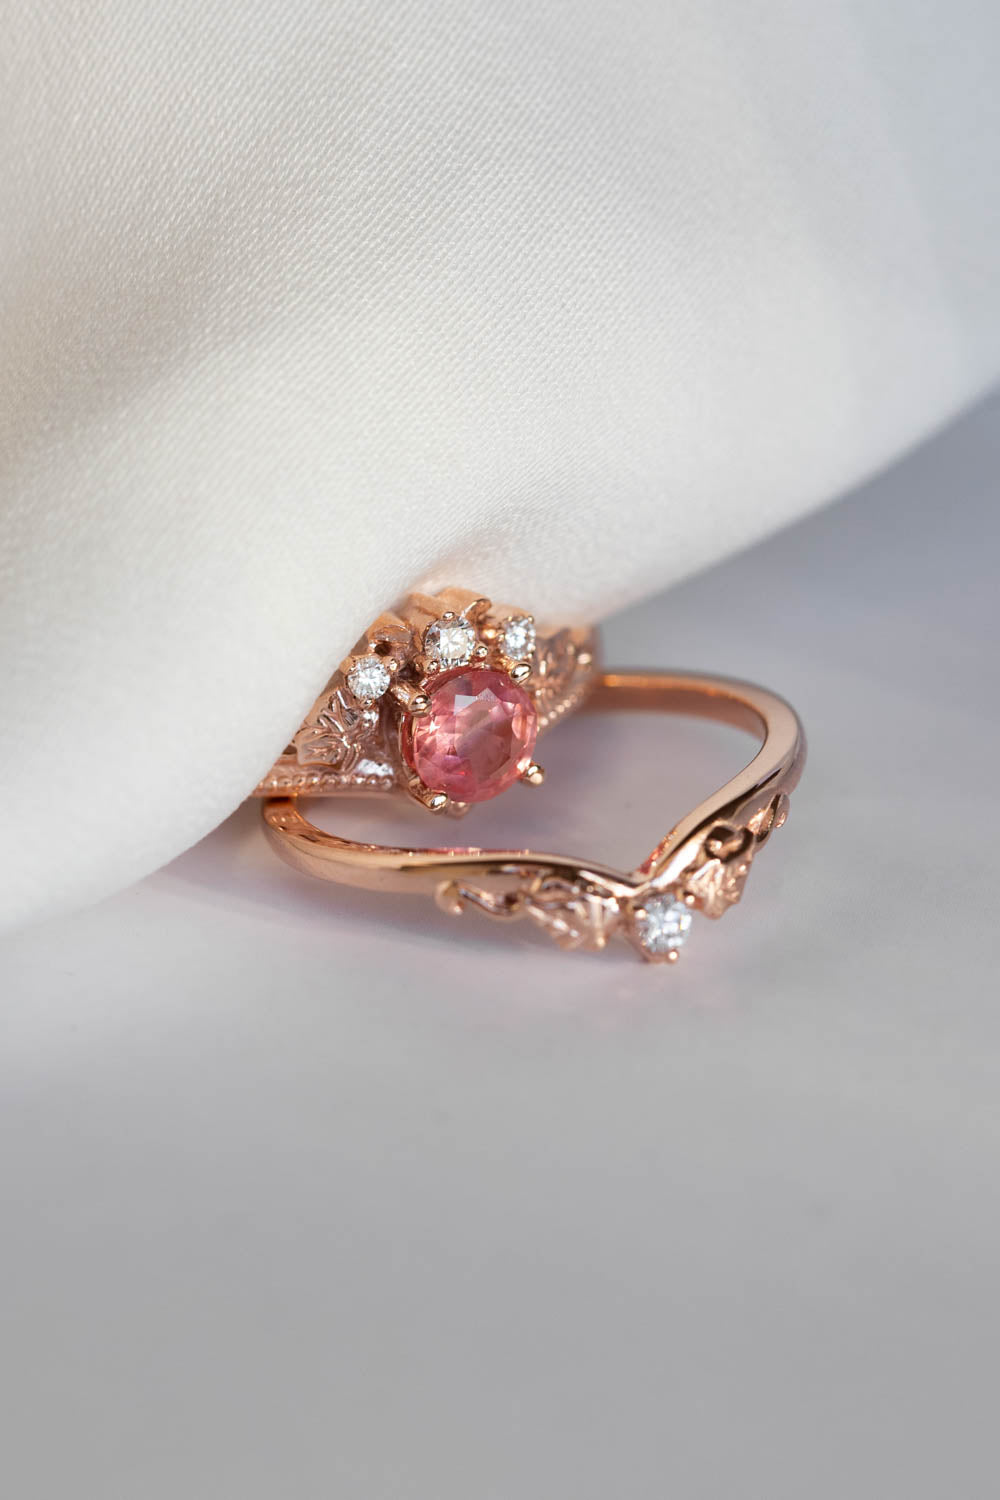 Natural padparadscha colour sapphire bridal ring set, rose gold ivy leaves rings with diamonds / Ariadne - Eden Garden Jewelry™